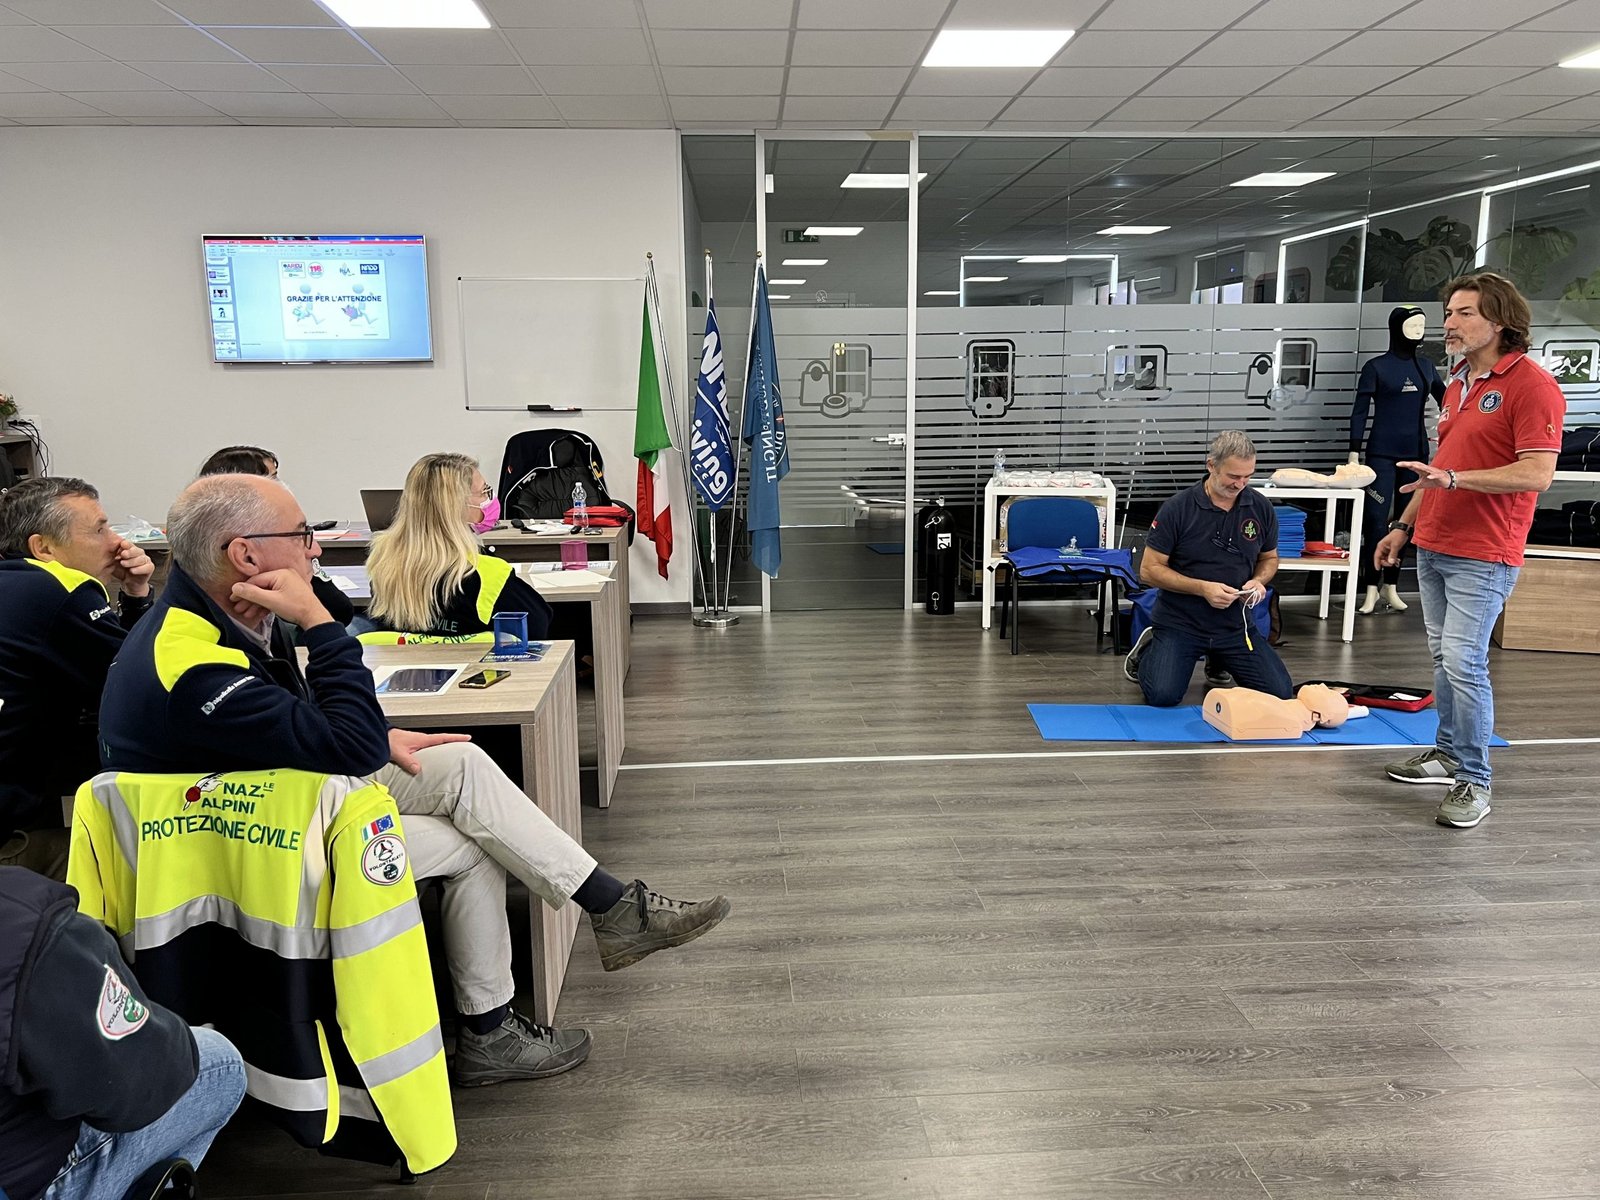 BLS-FIRST AID Course